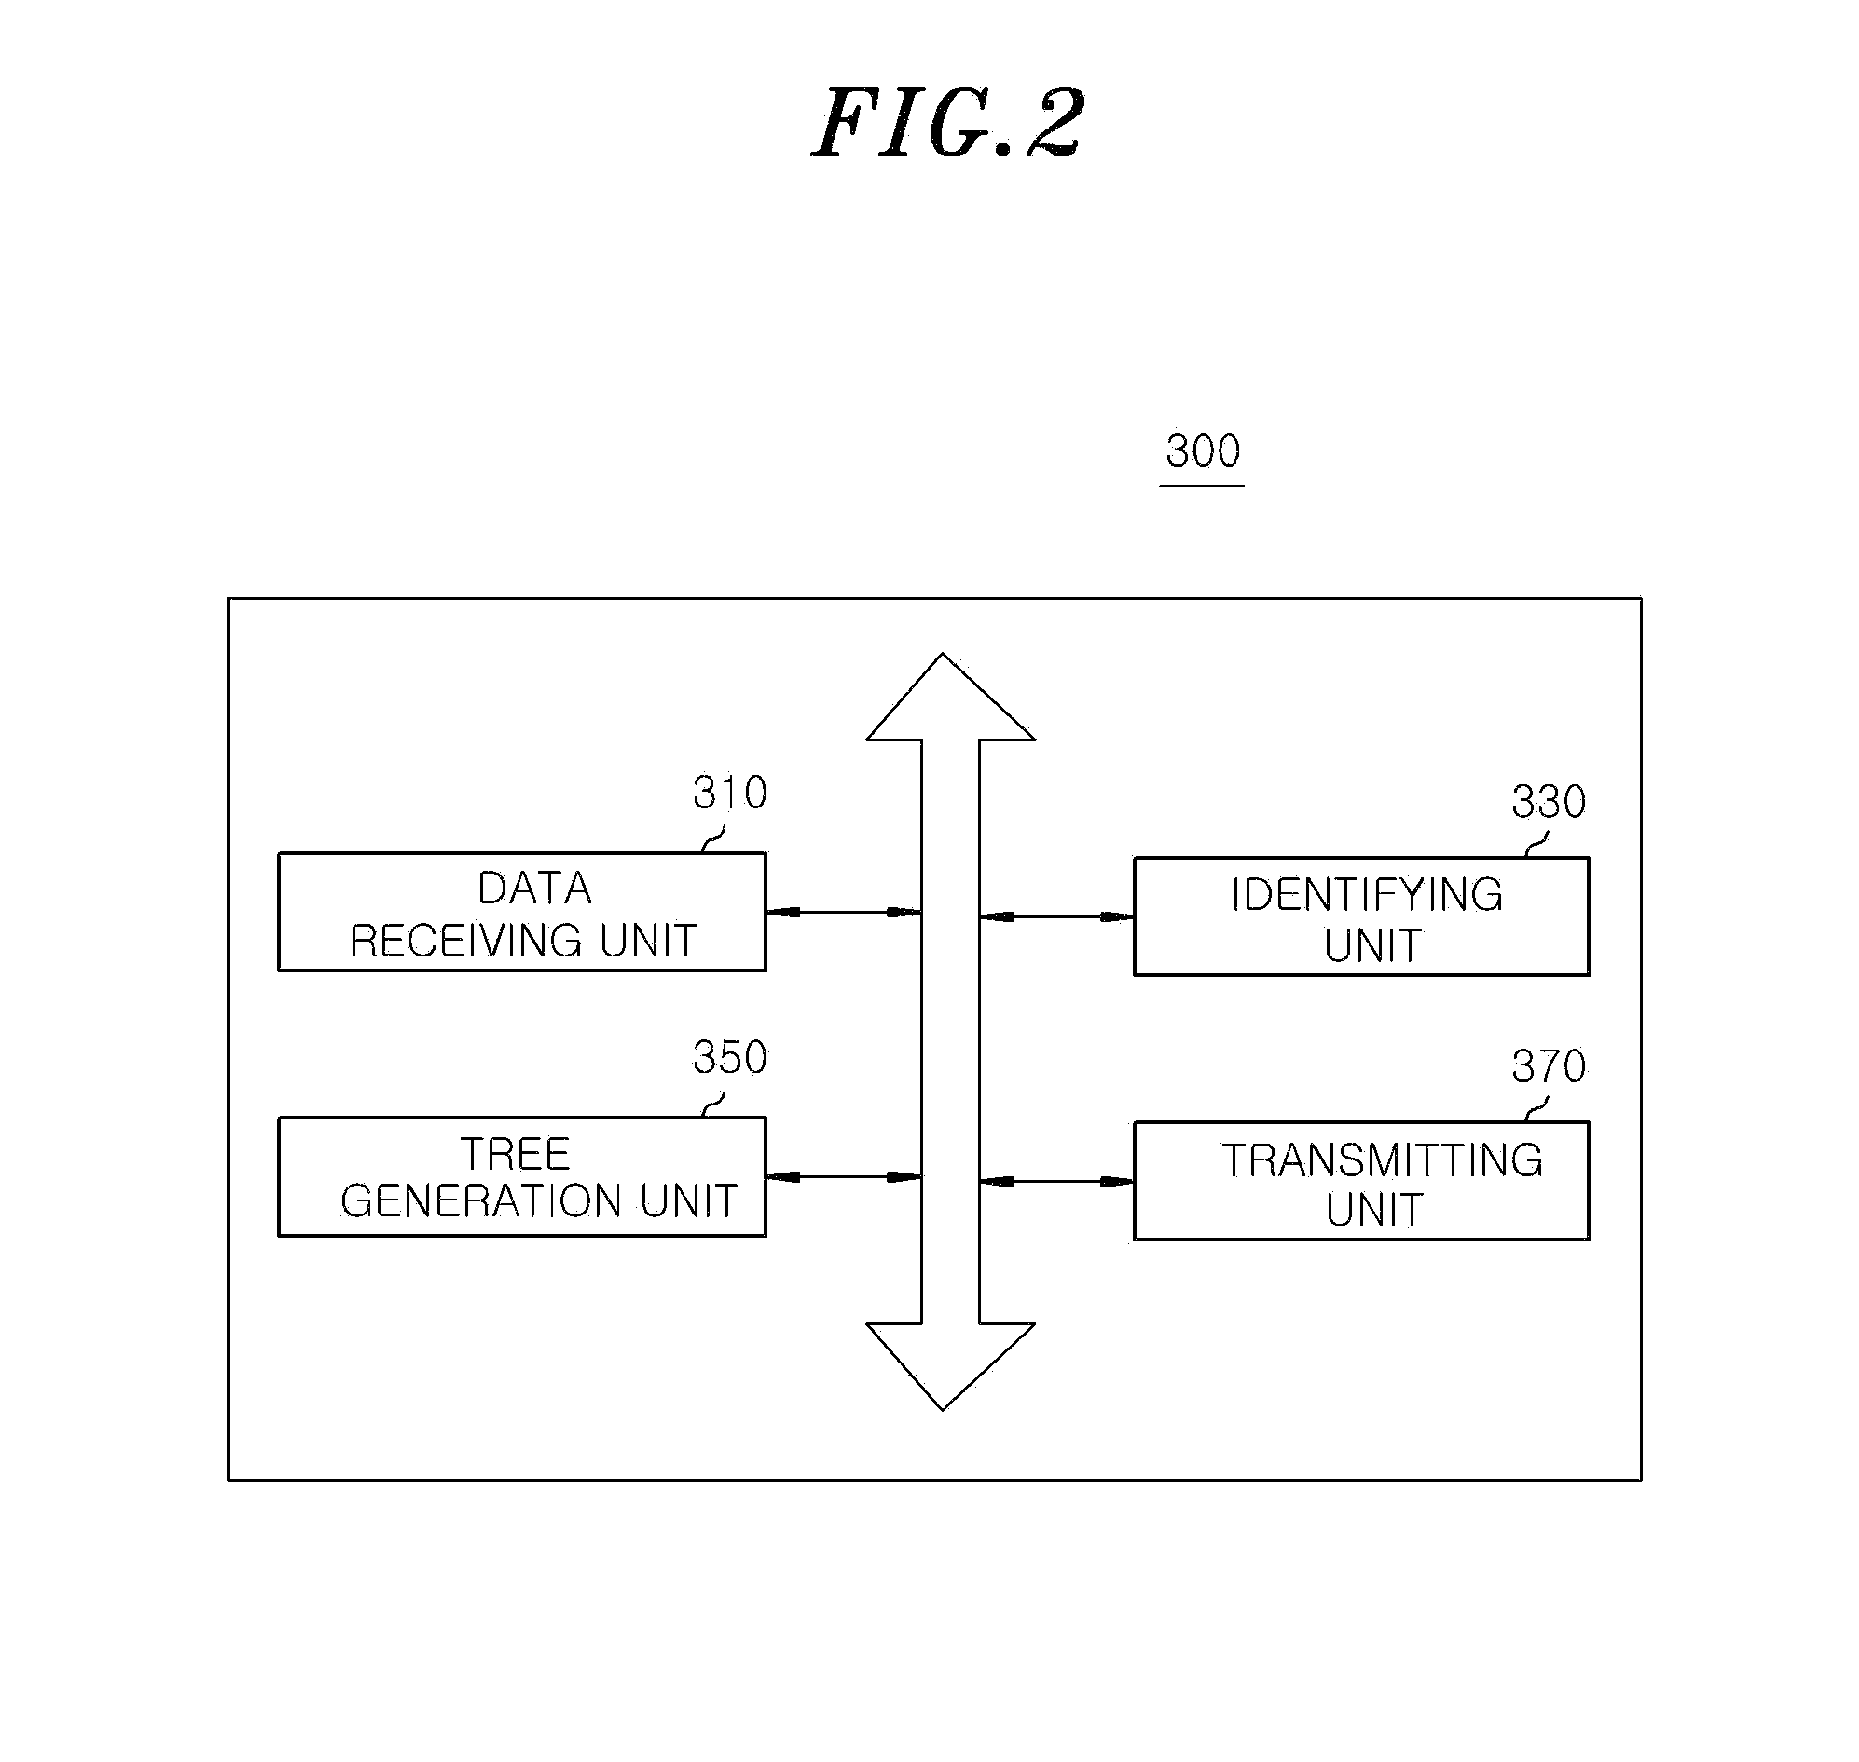 Method, server and recording medium for providing electronic patient information